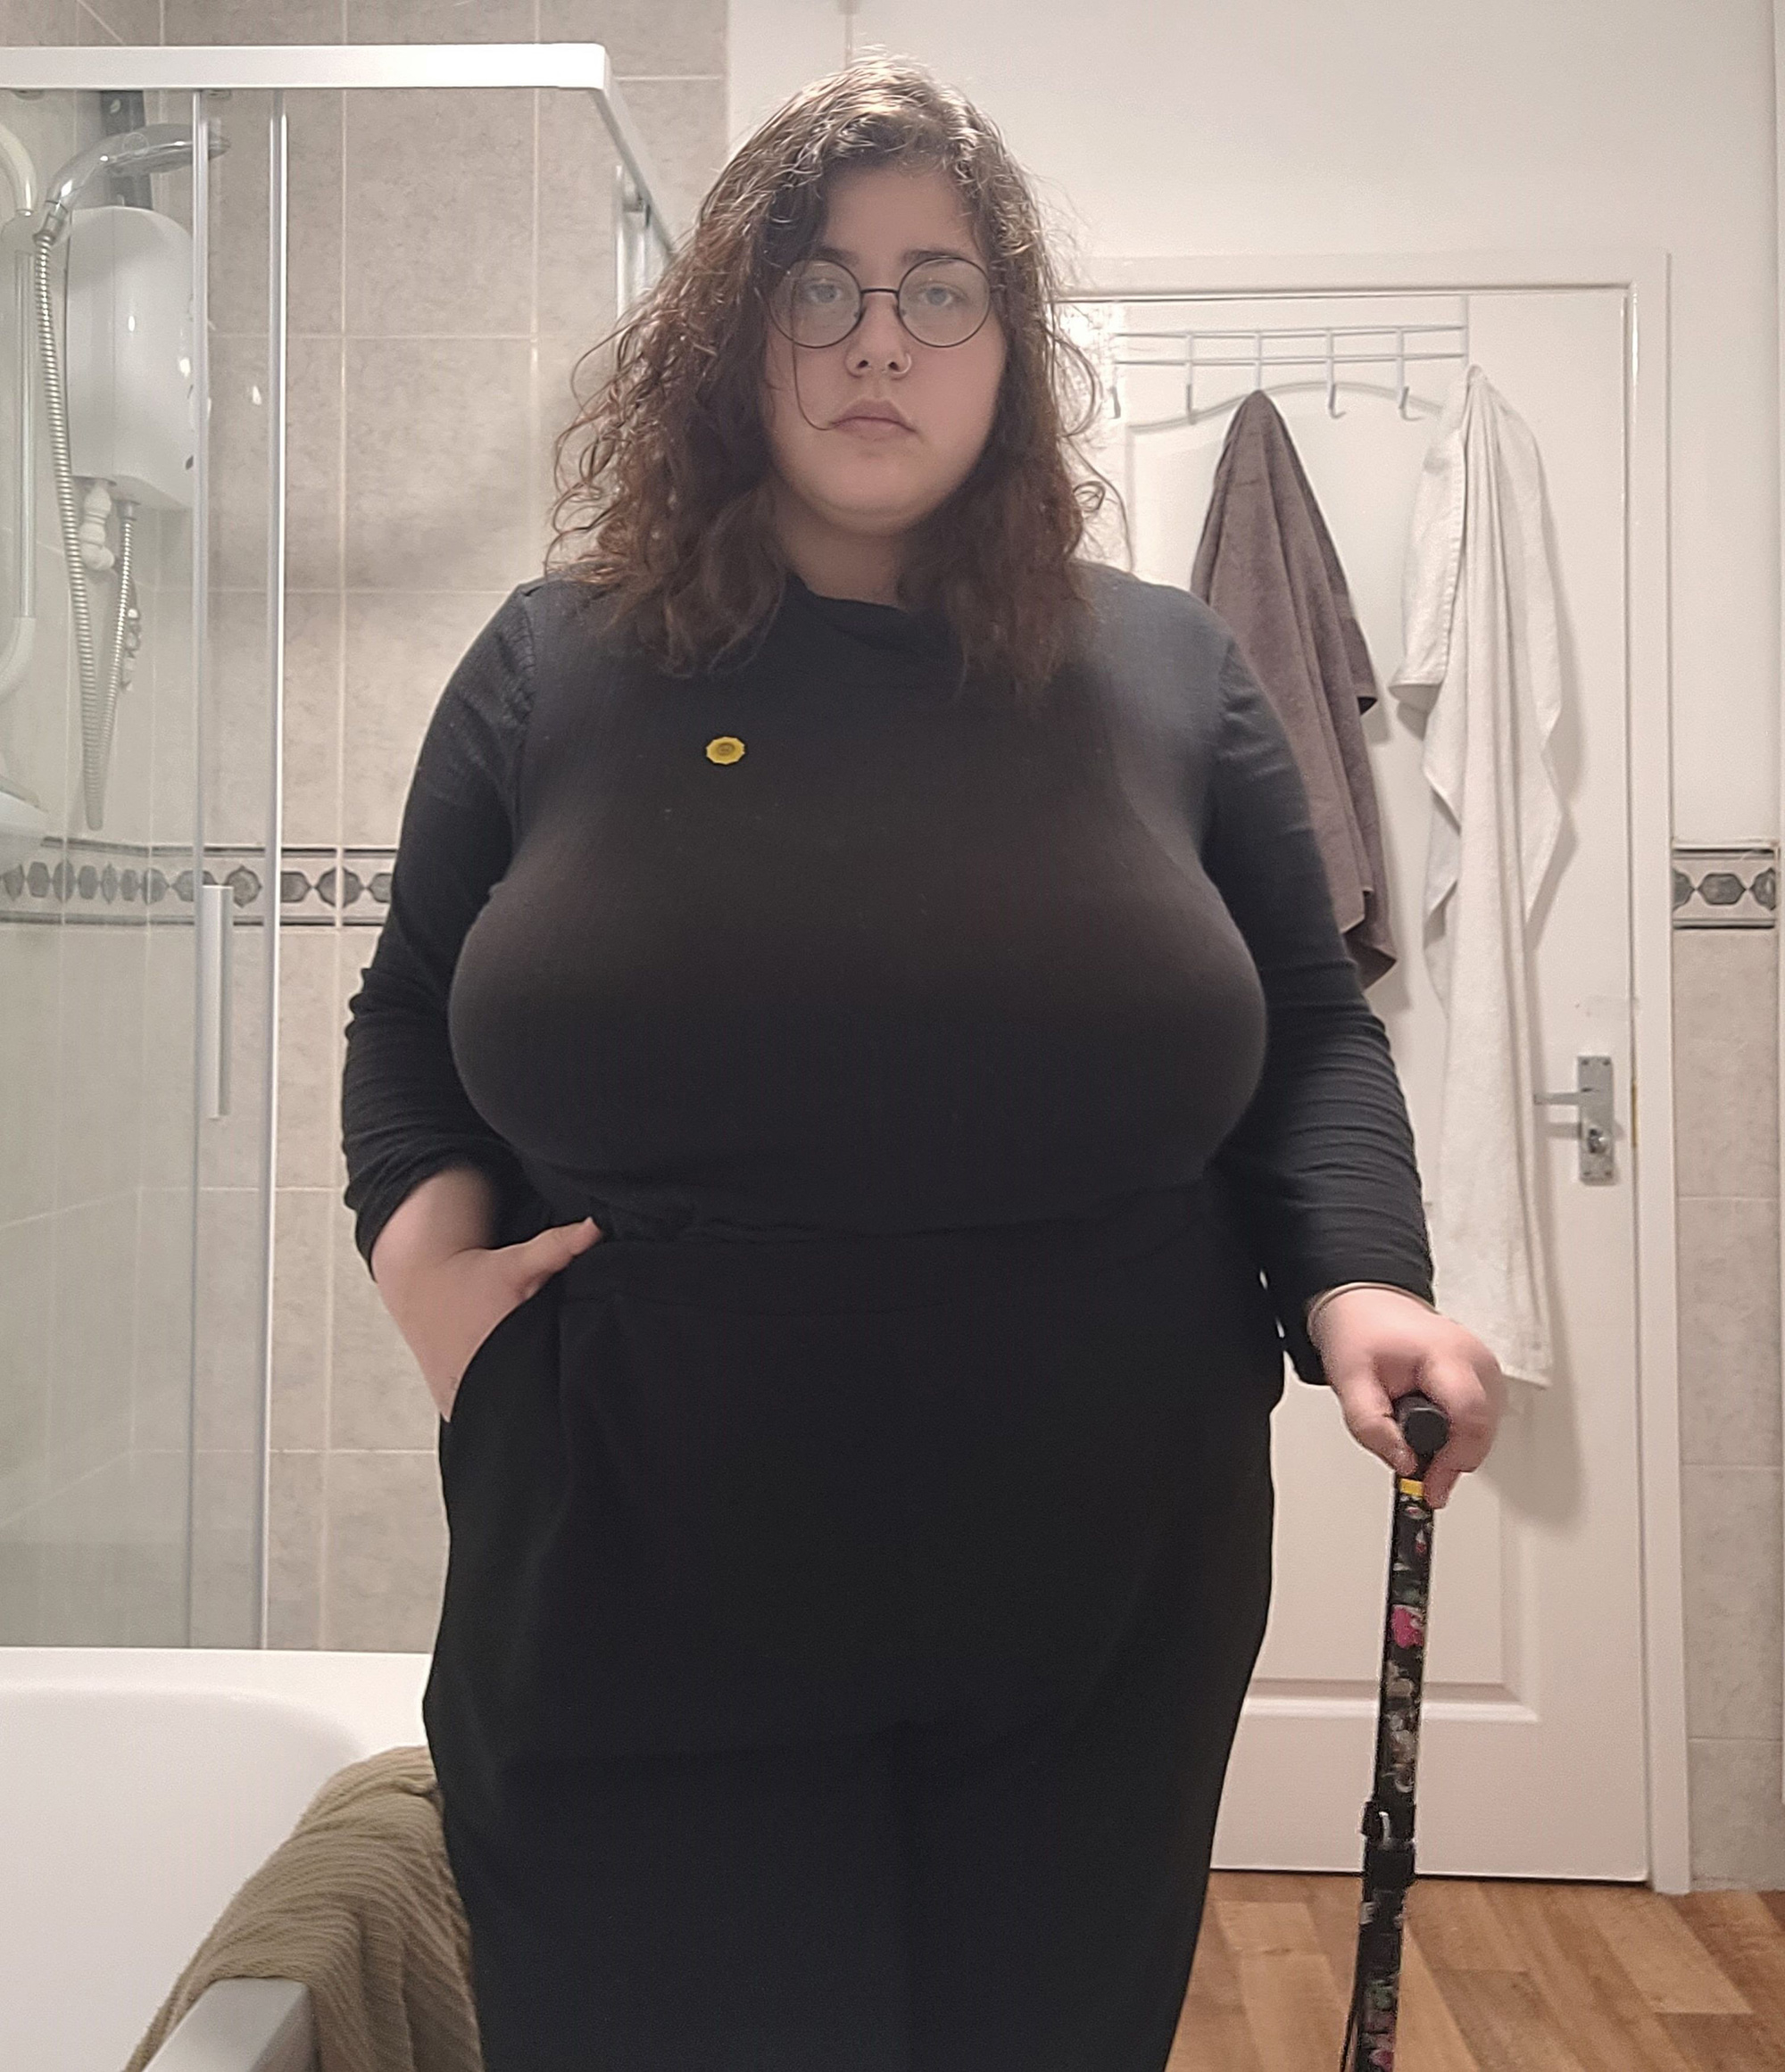 brandon dillow recommends Huge Bbw Teen Tits